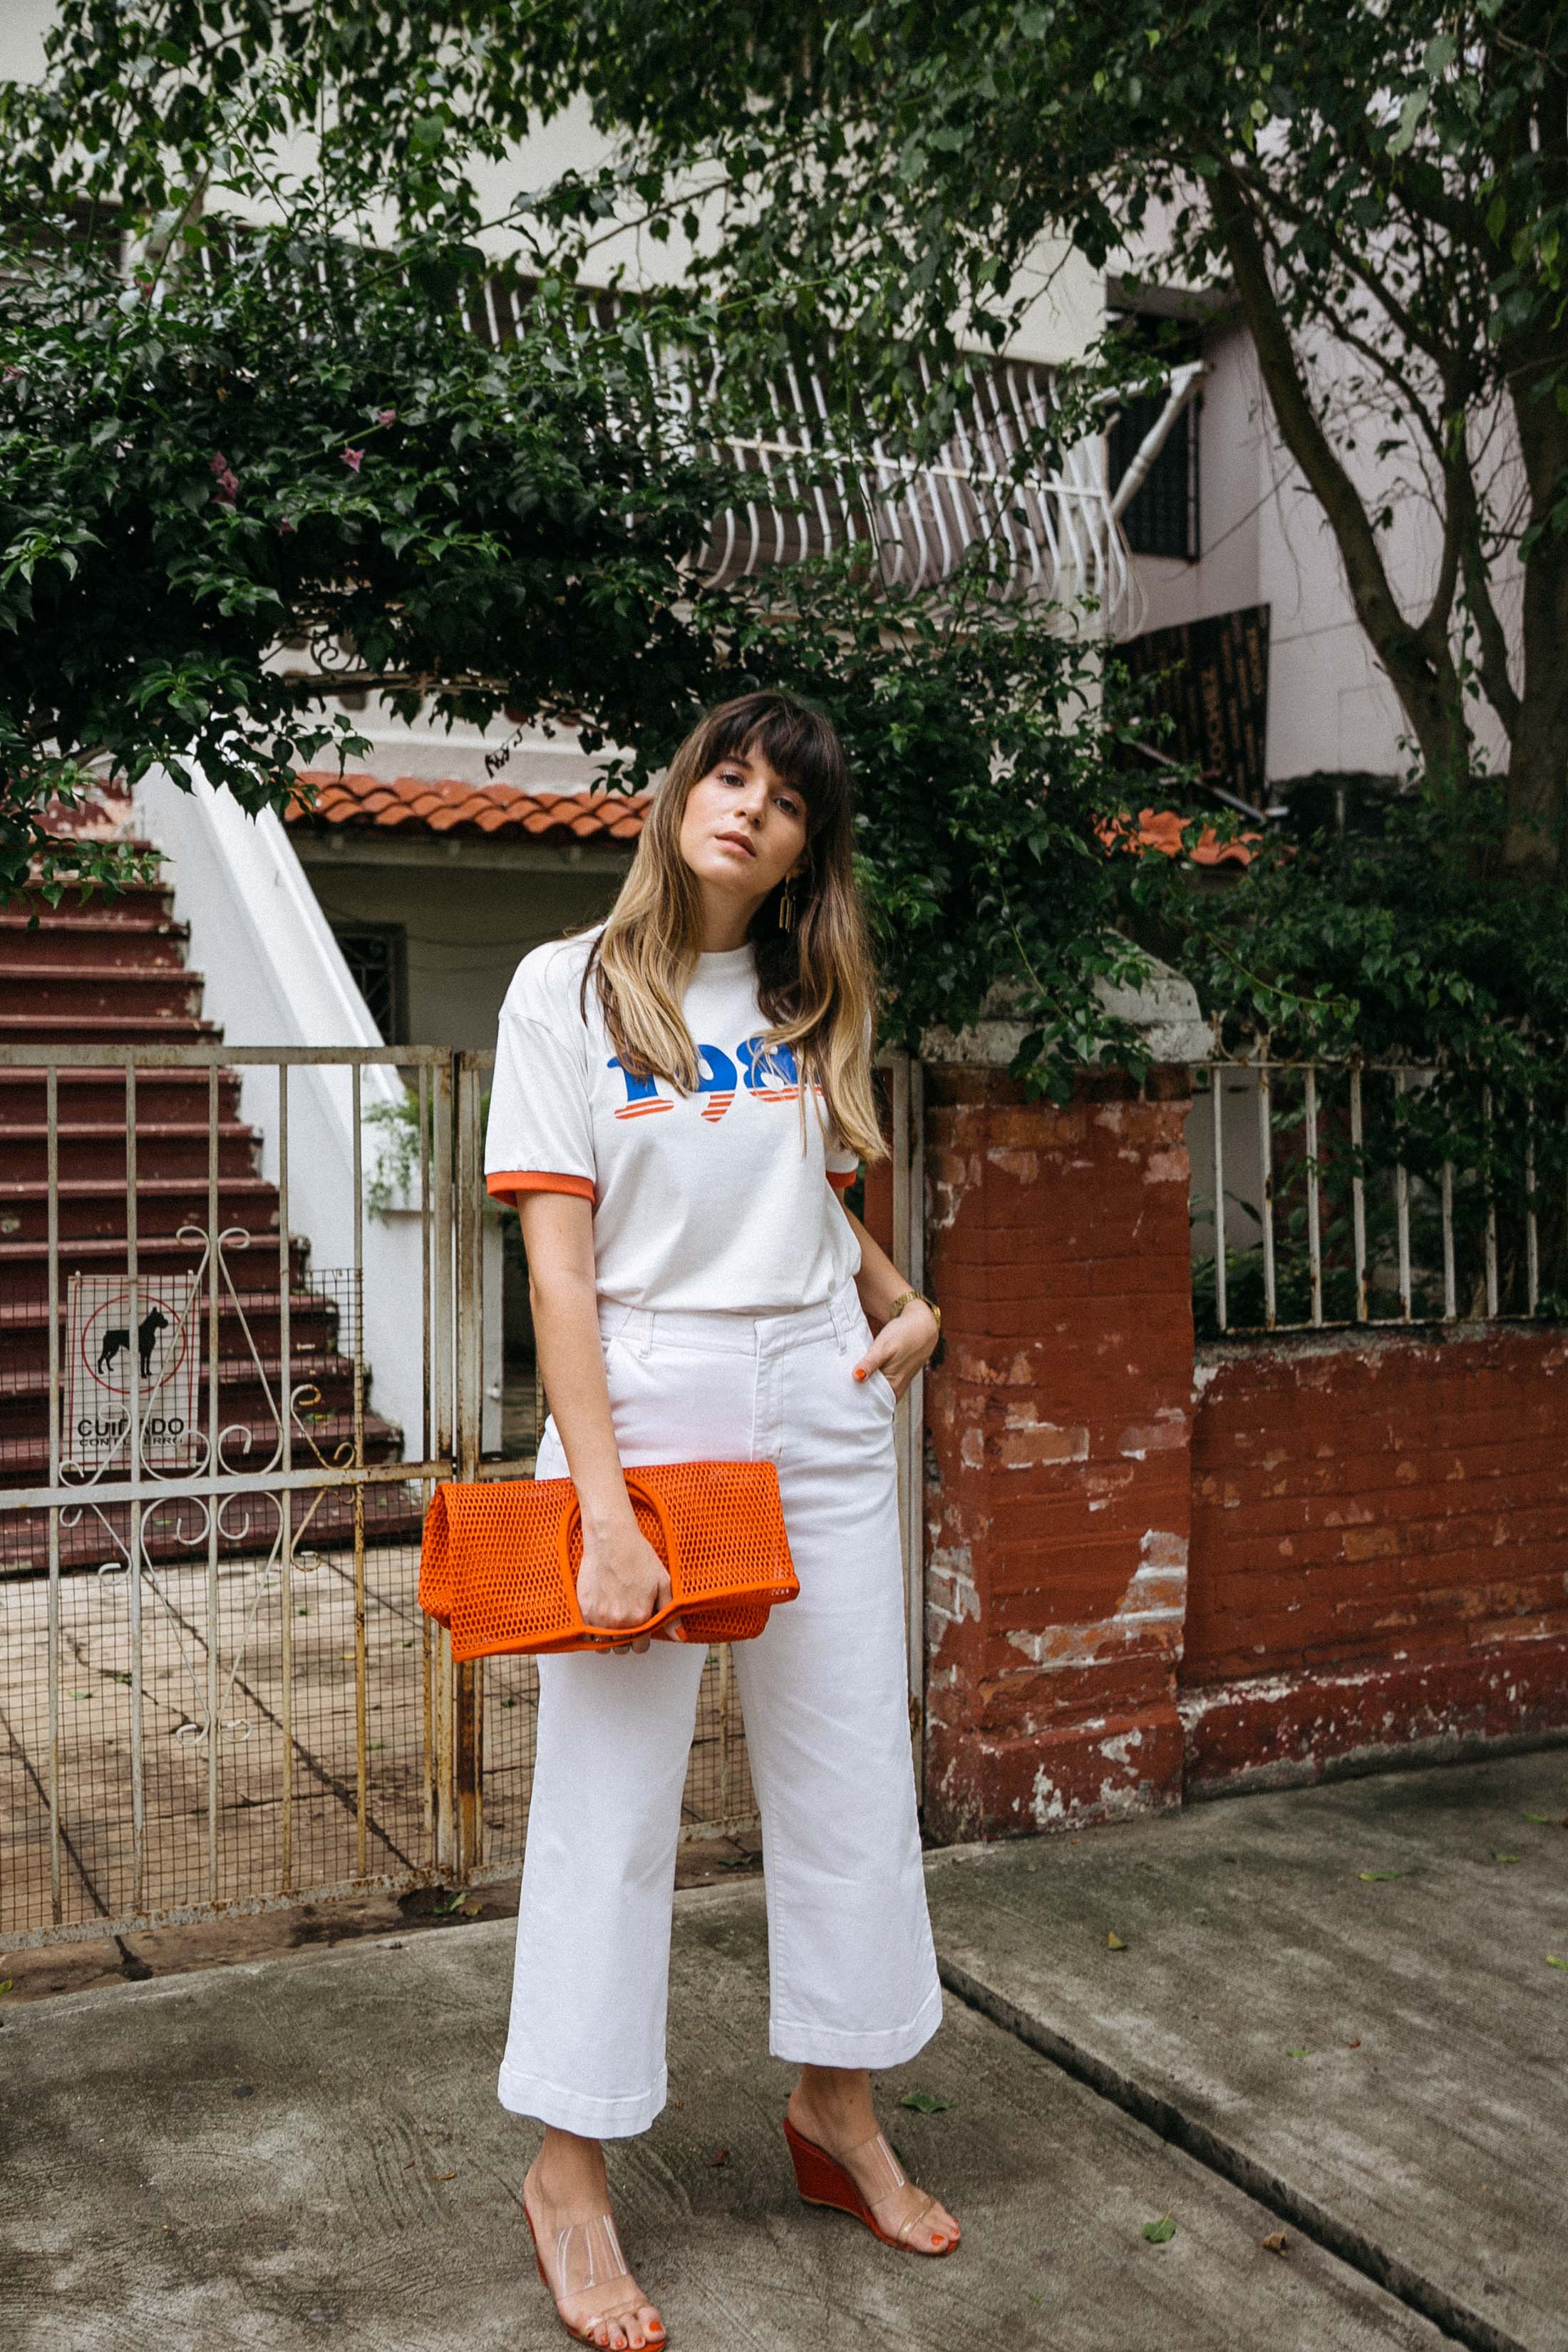 Maristella wears white wide leg jeans with a graphic ringer tee